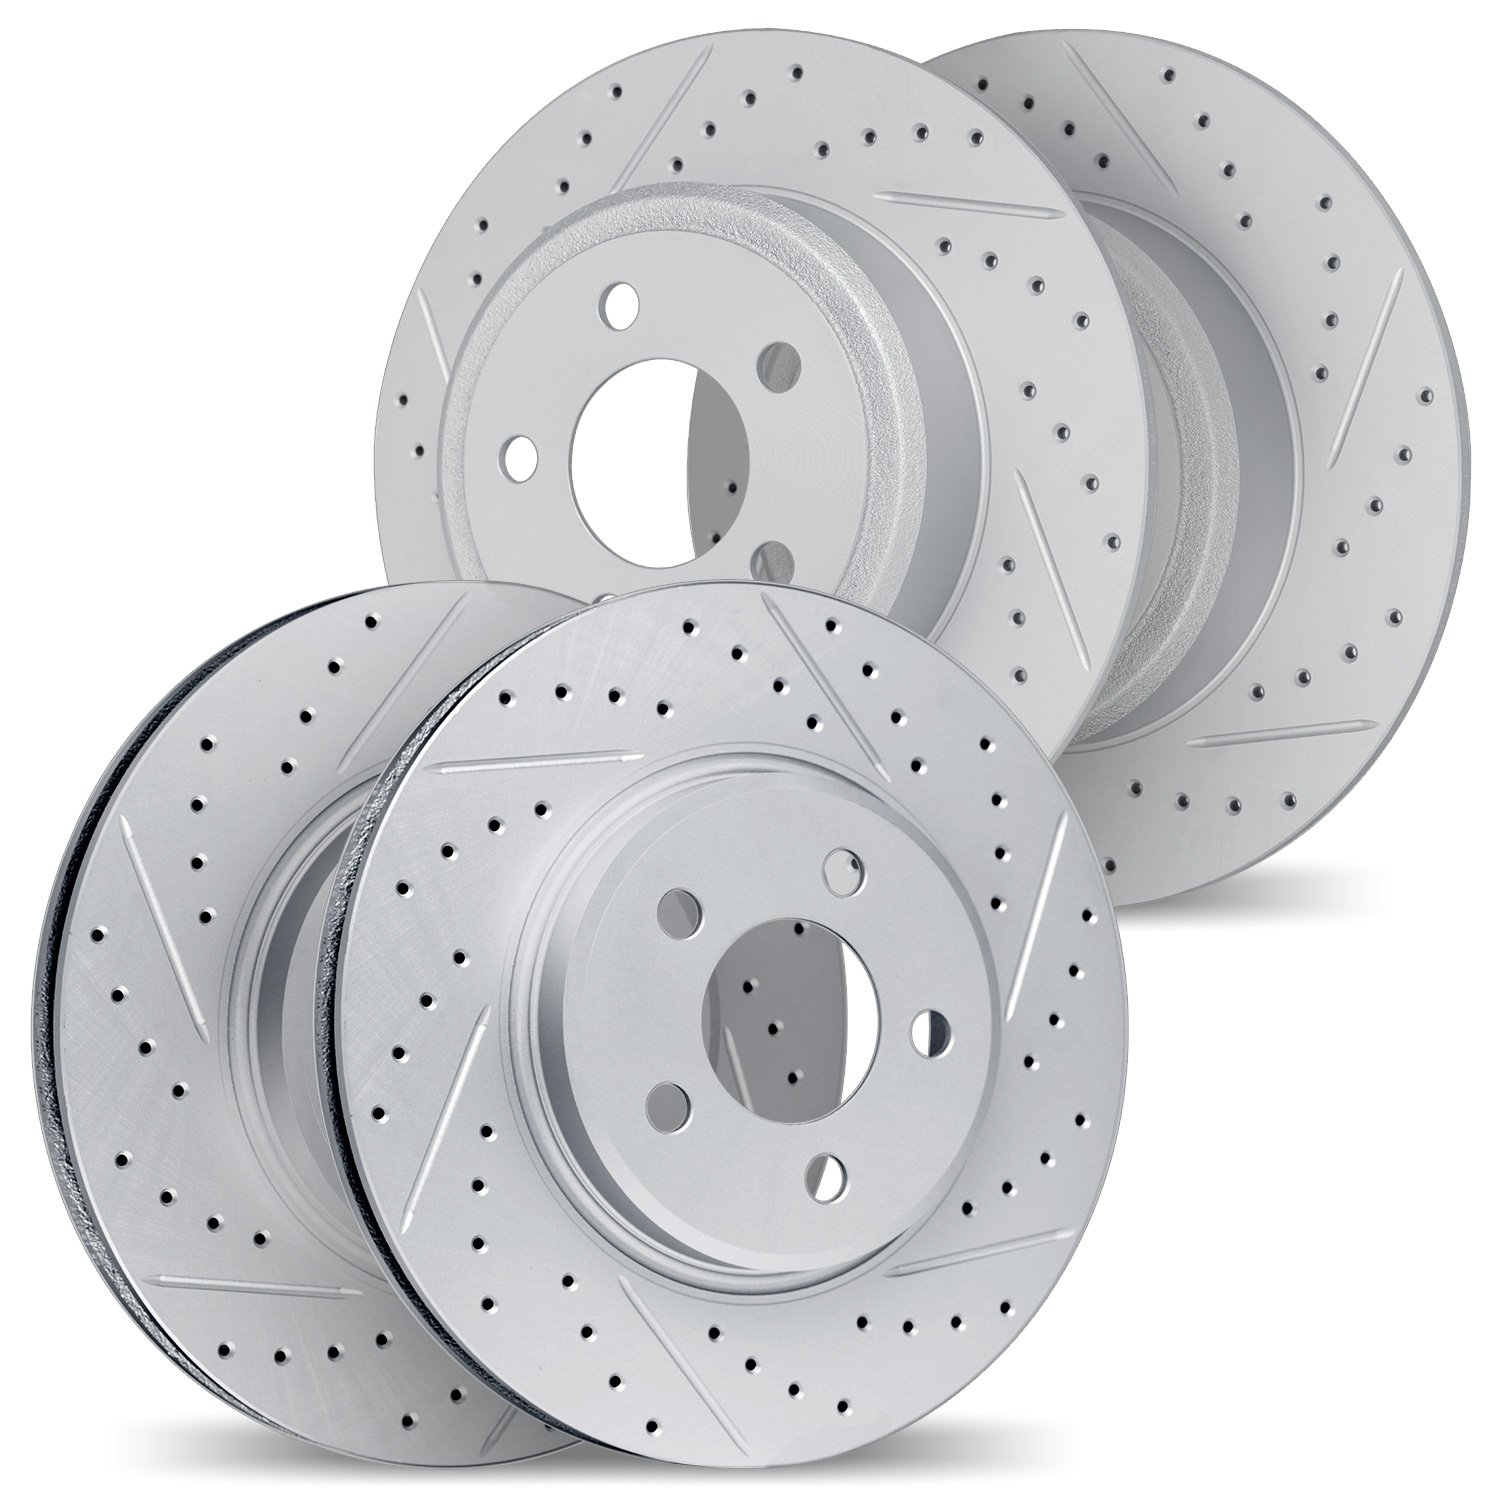 2004-59056 Geoperformance Drilled/Slotted Brake Rotors, 2005-2006 Acura/Honda, Position: Front and Rear